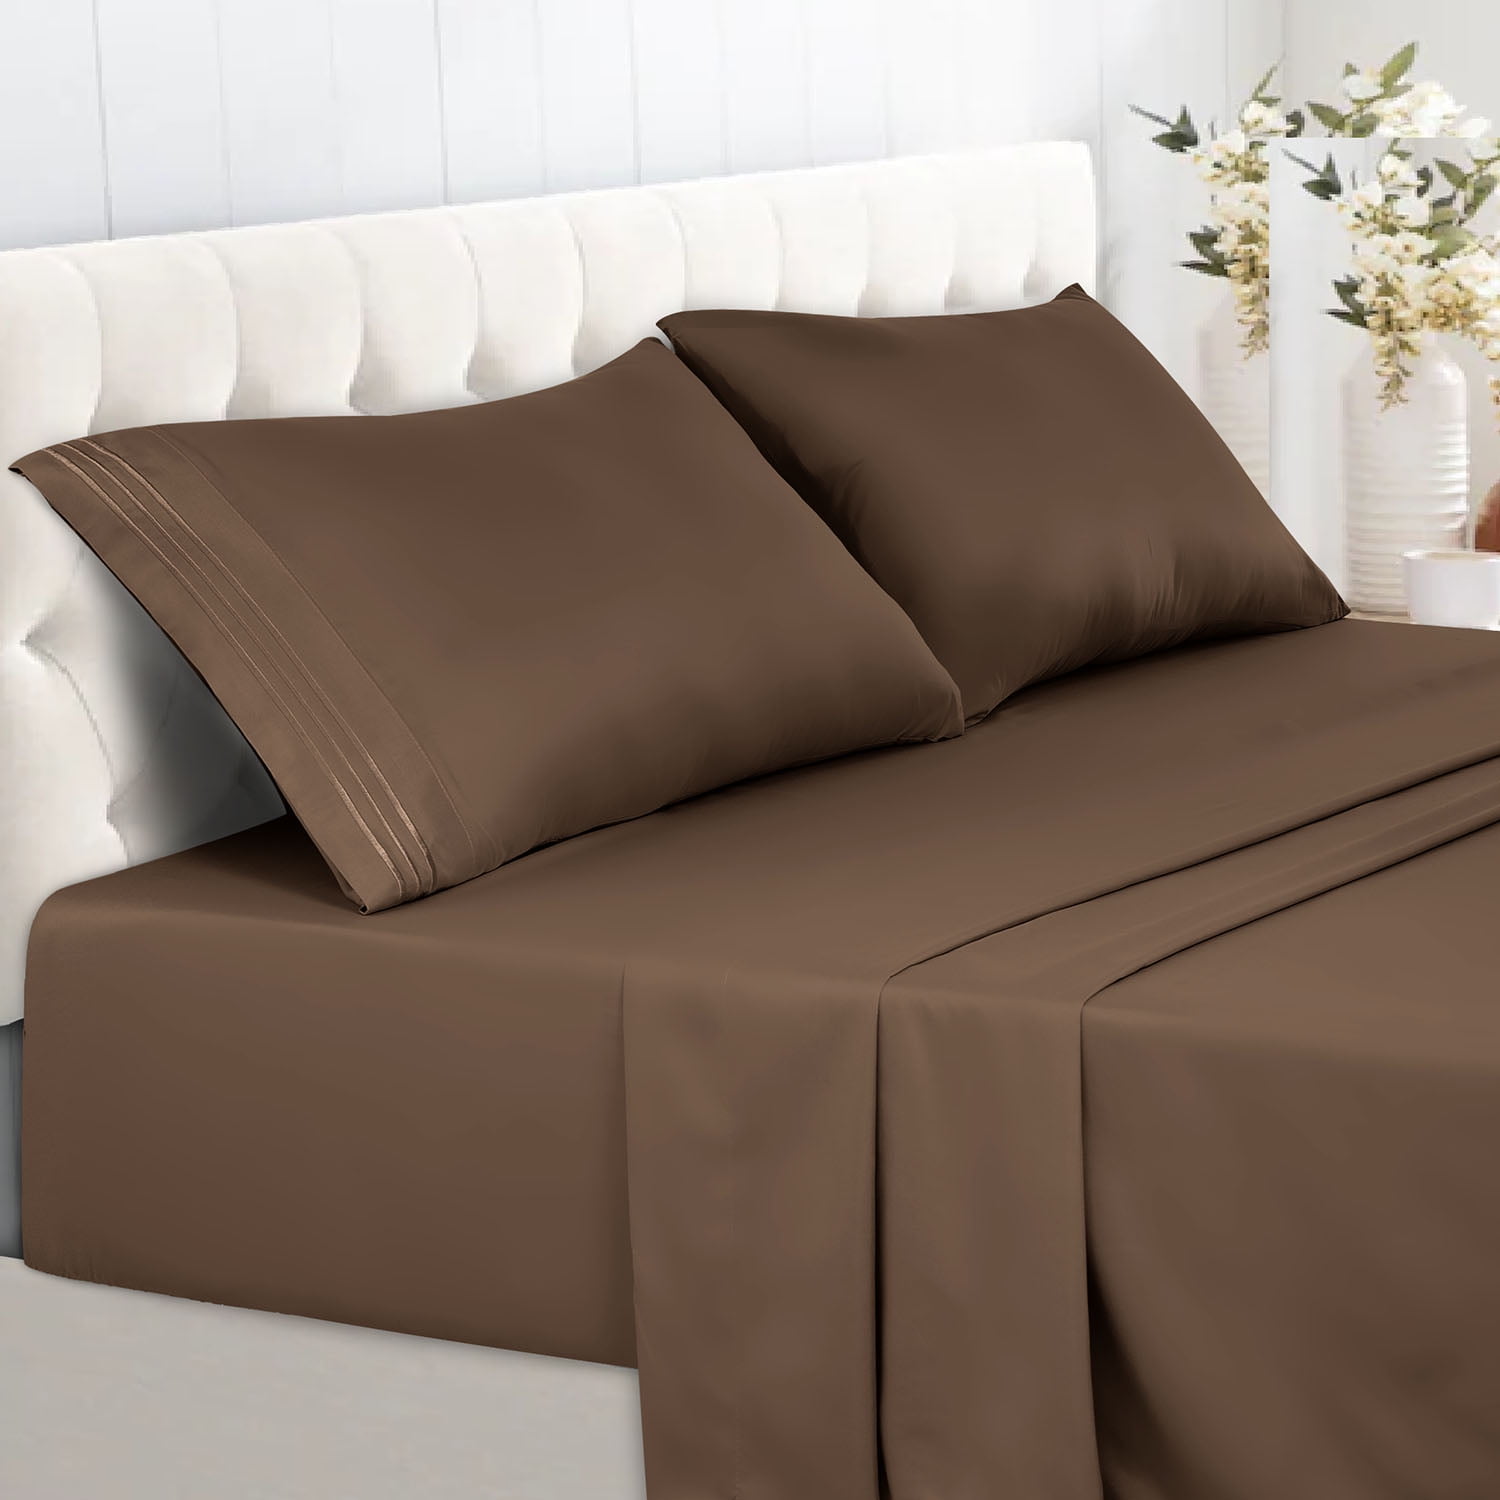 Lux Decor Collection Microfiber Queen Bed Sheets Set, 6 Pc Deep Pocket Bedding  Set - Taupe, Queen - Fred Meyer